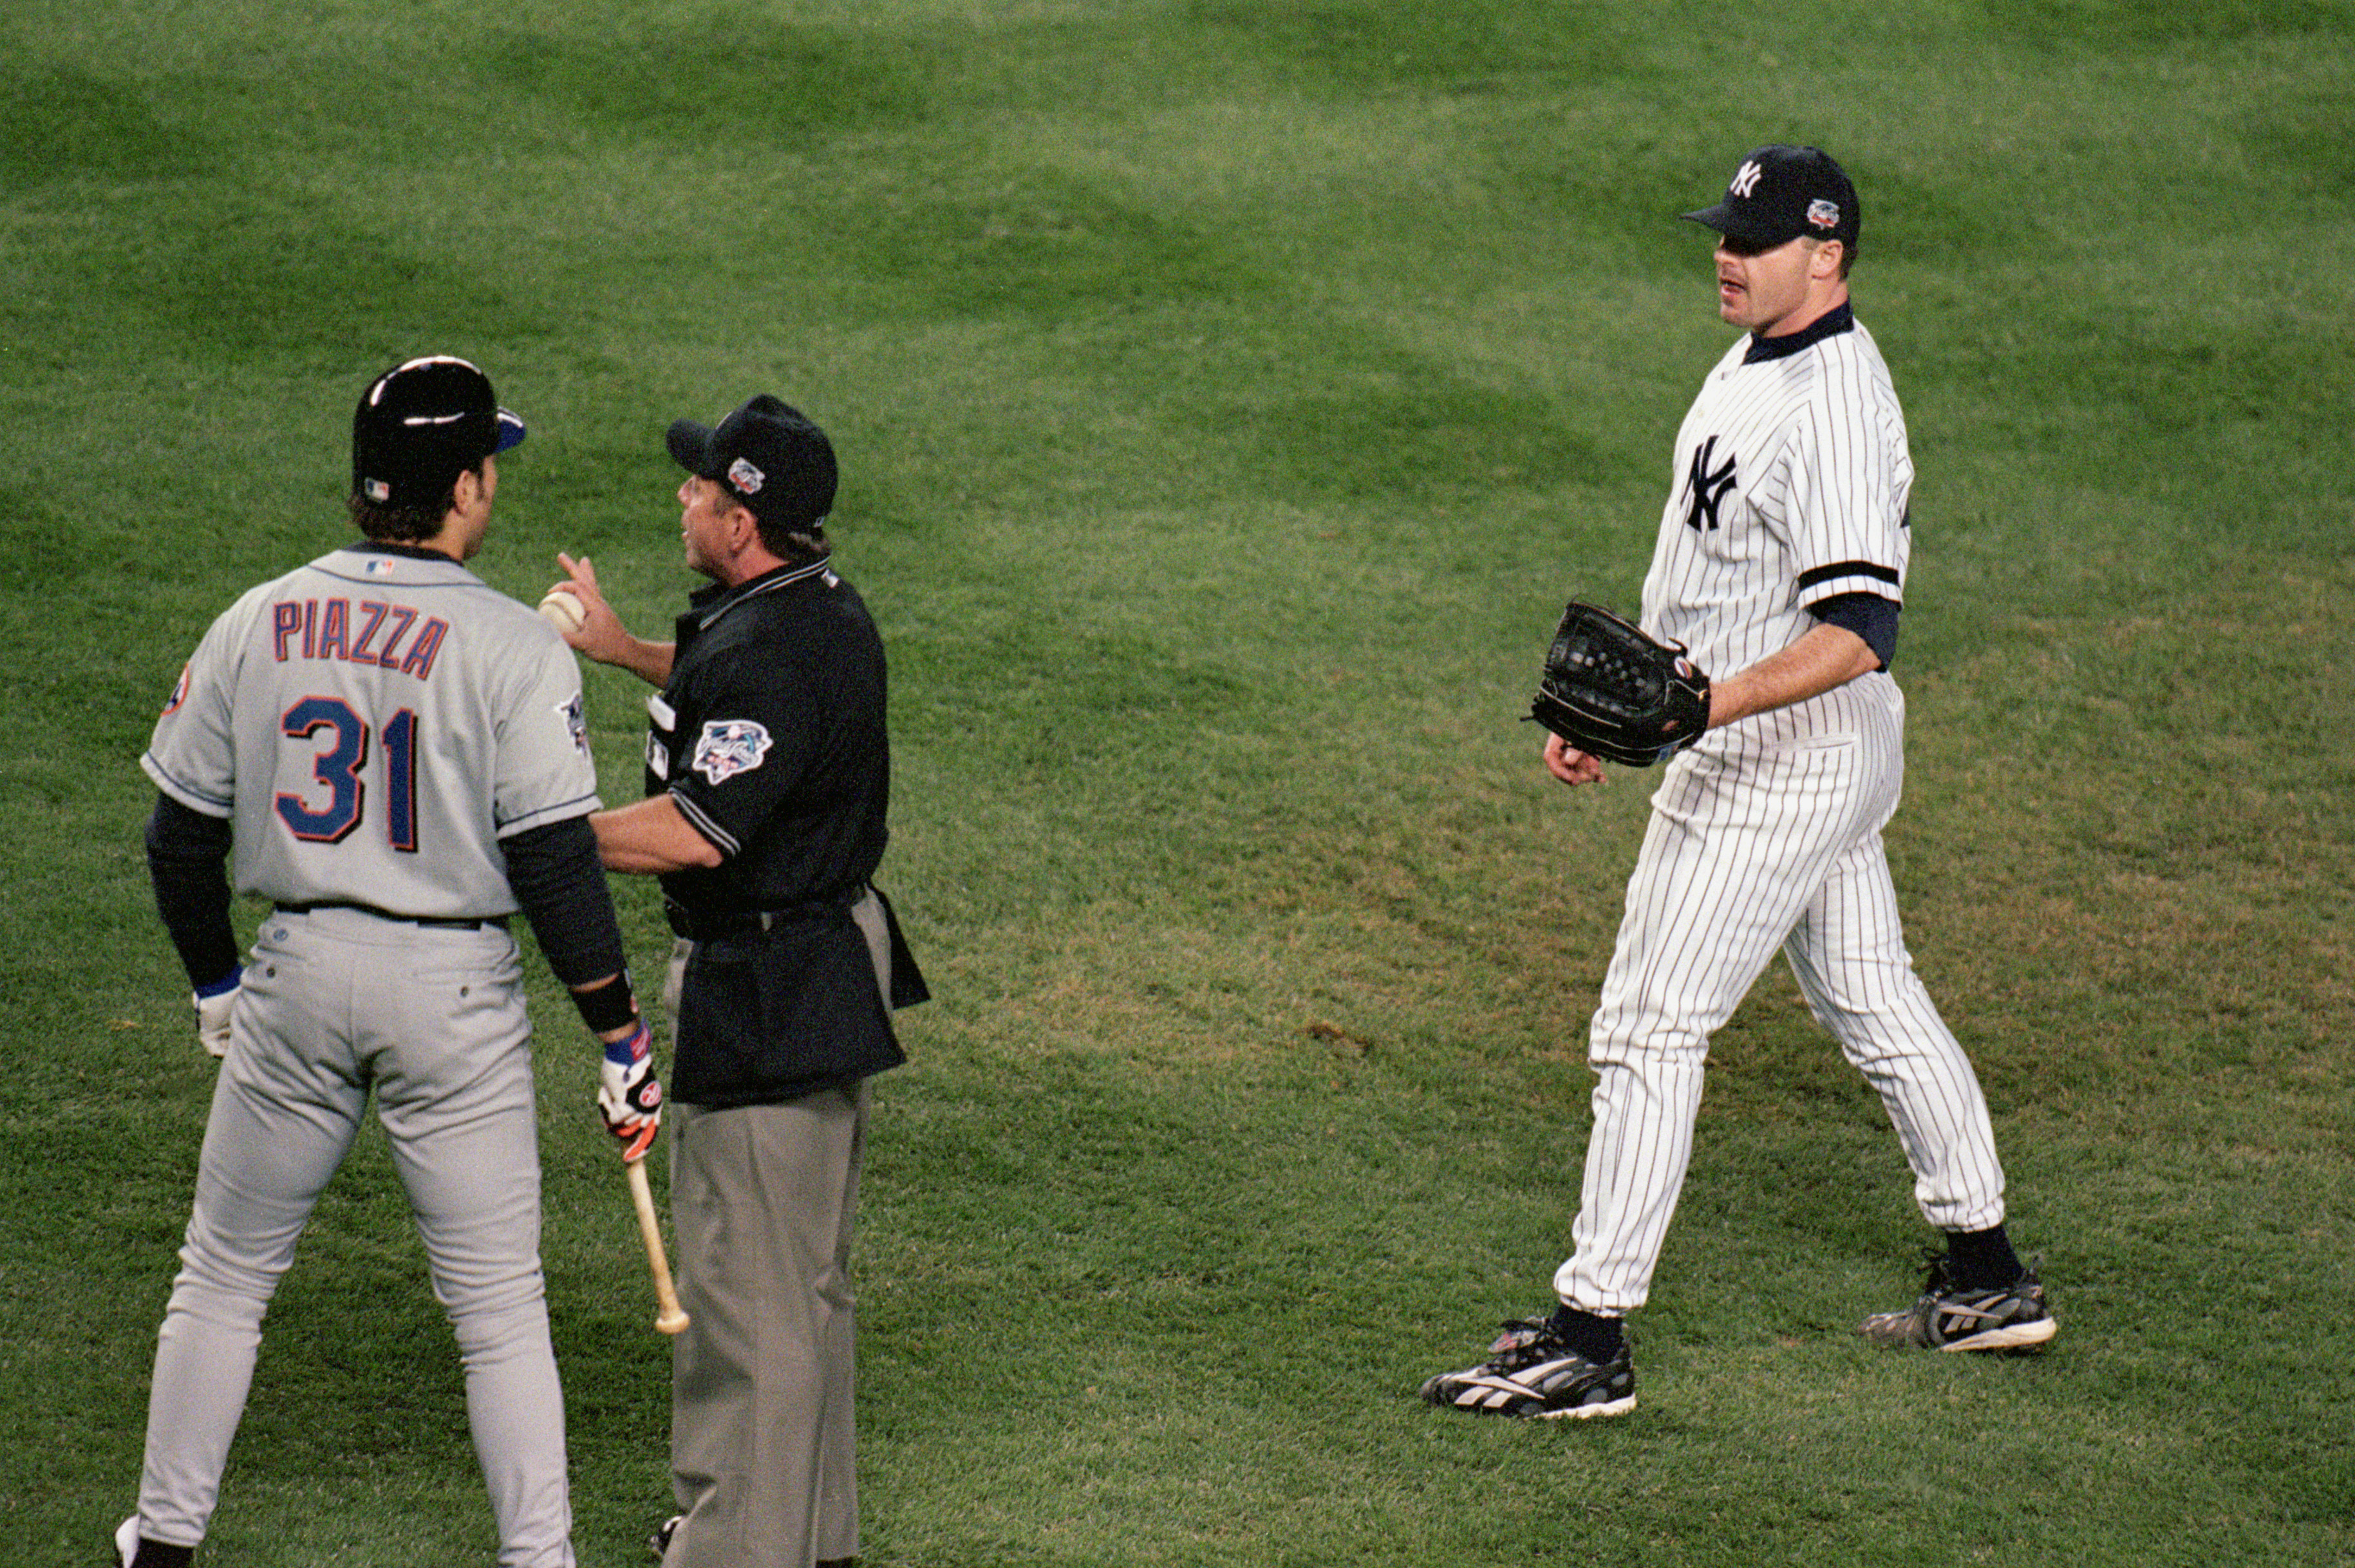 NEW YORK - OCTOBER 22:  Pitcher Roger Clemens #22 of the New York Yankees watches as Mike Piazza #31 of the New York Mets argues with the home plate umpire during game 2 of the World Series at Yankee Stadium in New York, New York on October 22, 2000.  The